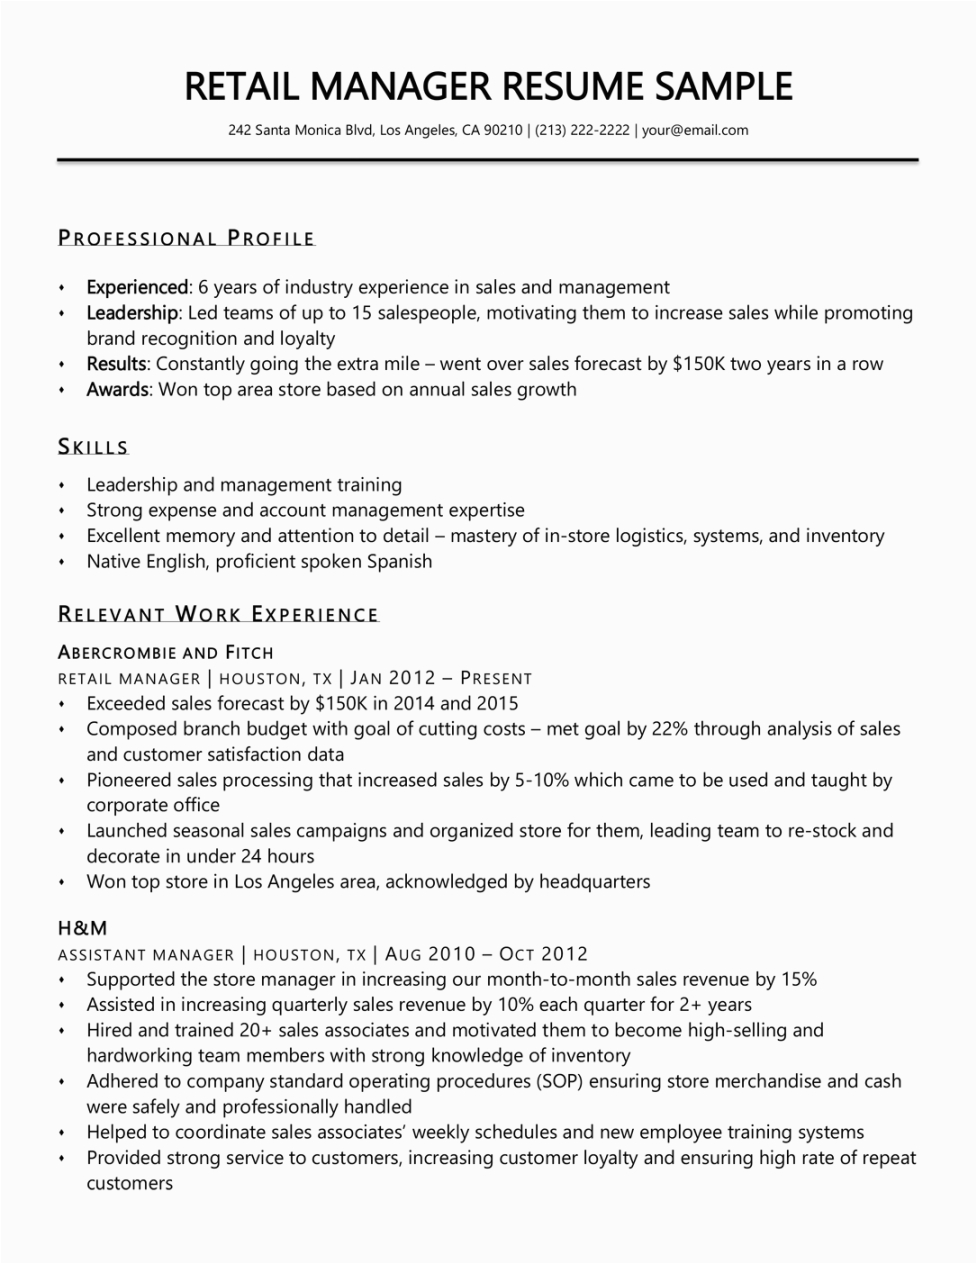 Resume Samples for Retail Store Jobs Retail Management Resume Template